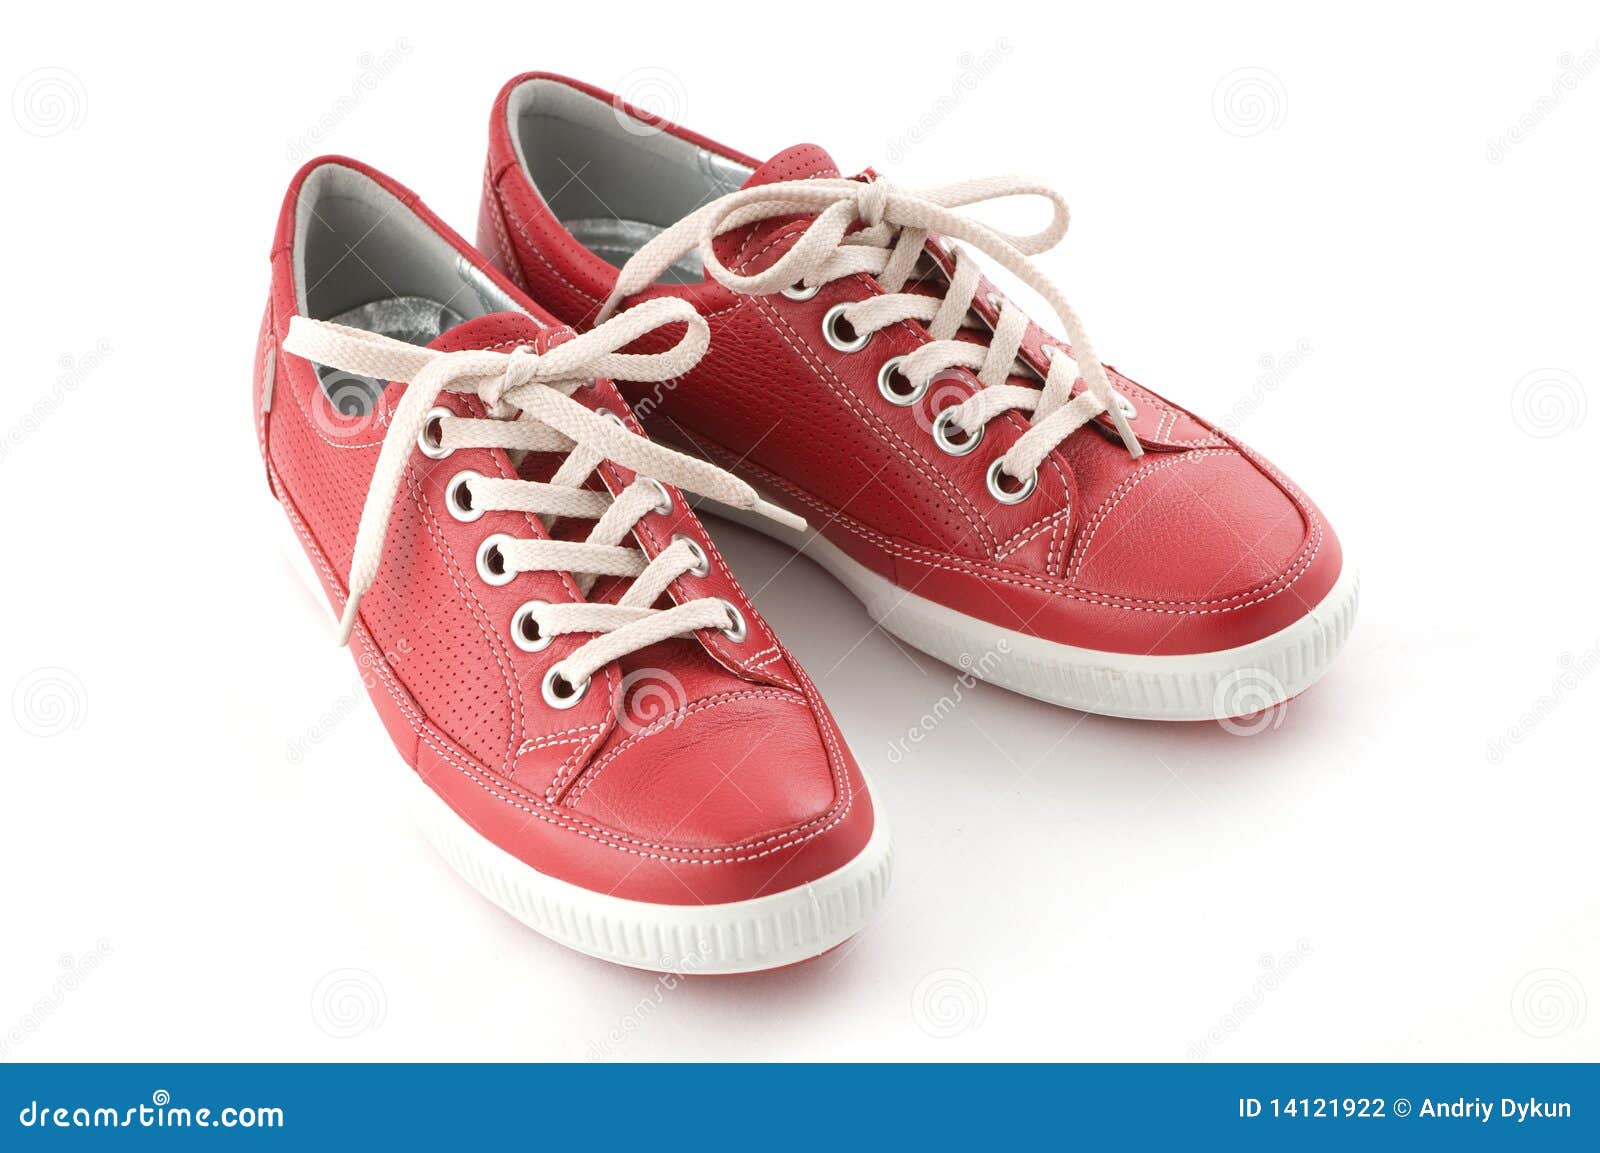 Red leather sneakers stock photo. Image of color, human - 14121922